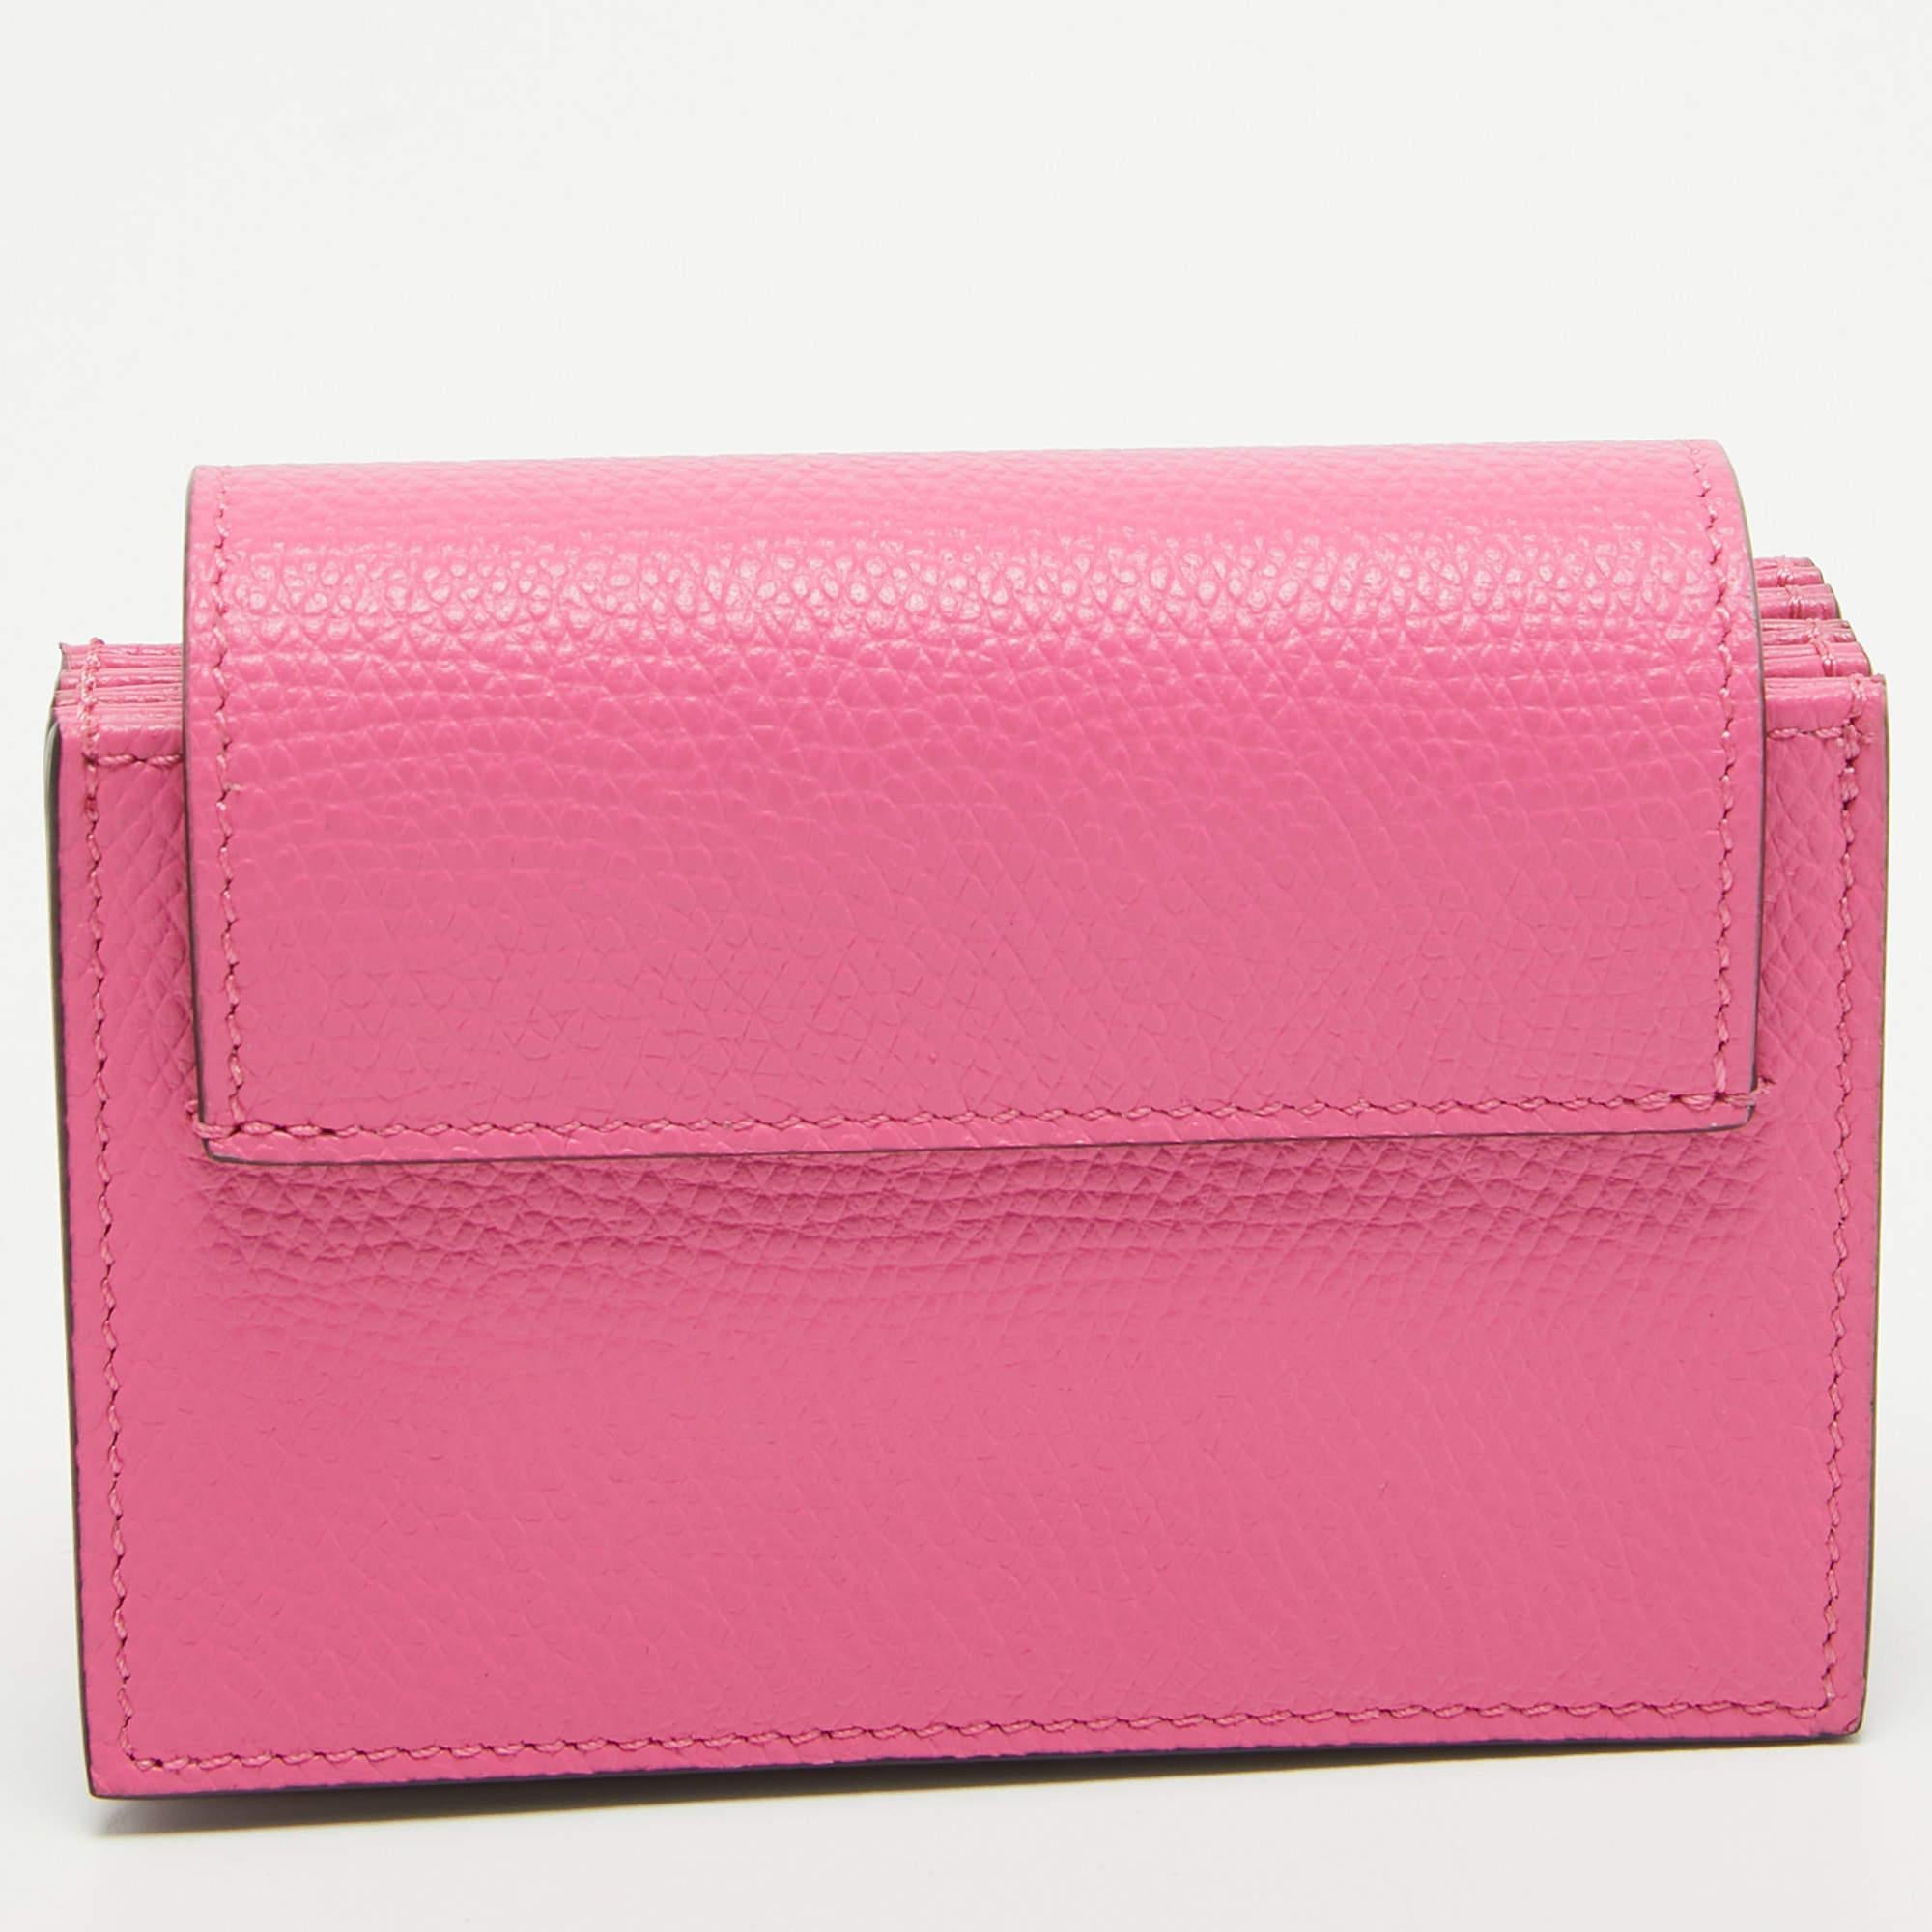 Valentino Pink Leather VLogo Accordion Card Holder For Sale 4